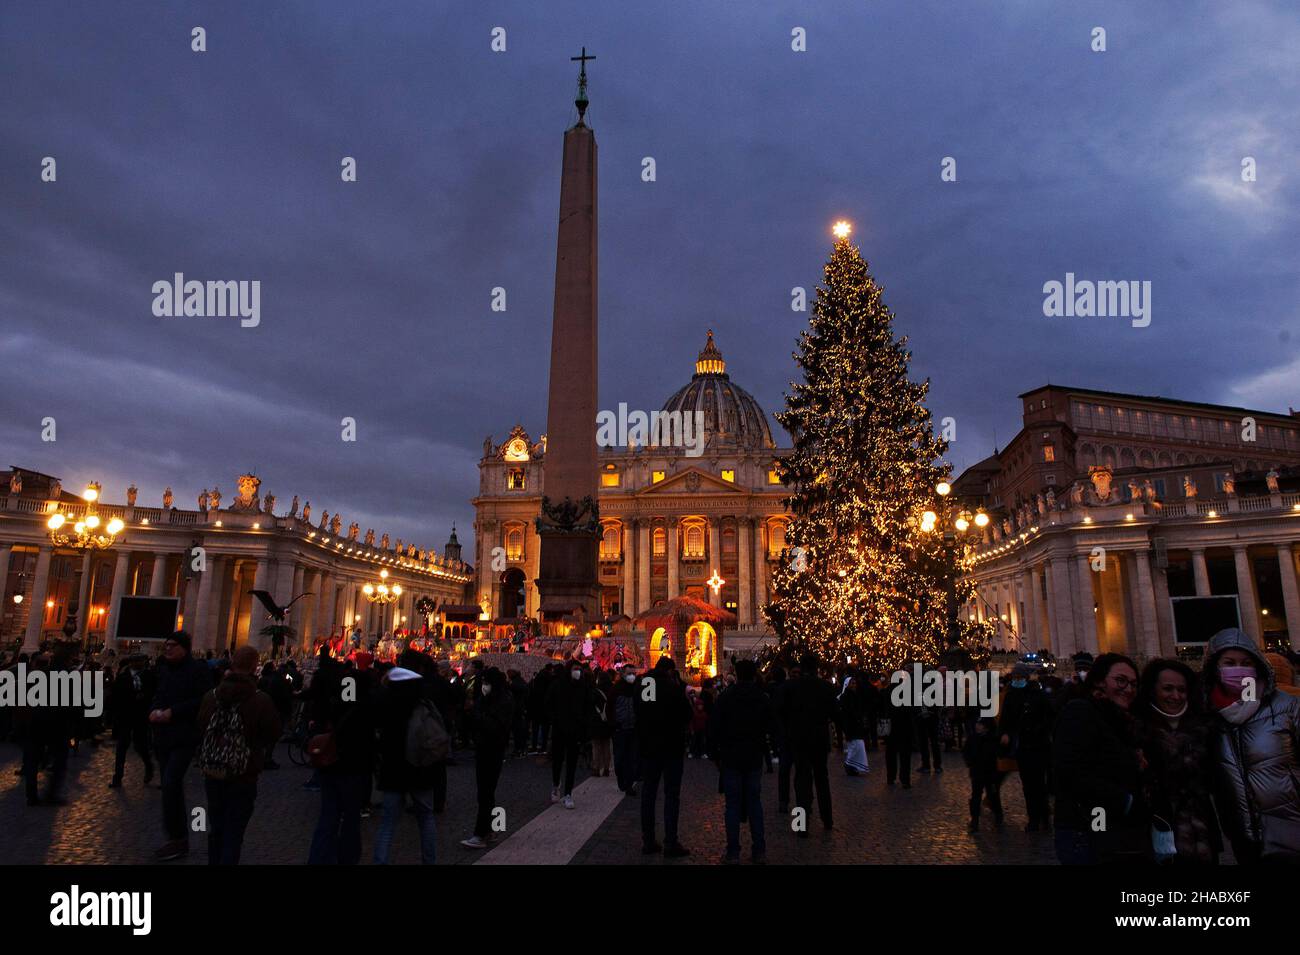 Italy, Rome, Vatican, 2021/12/11. A general view shows The Vatican's Christmas Tree and Nativity Scene at St. Peter's Square at the Vatican Photograph by Alessia Giuliani / Catholic Press Photo RESTRICTED TO EDITORIAL USE - NO MARKETING - NO ADVERTISING CAMPAIGNS. Stock Photo